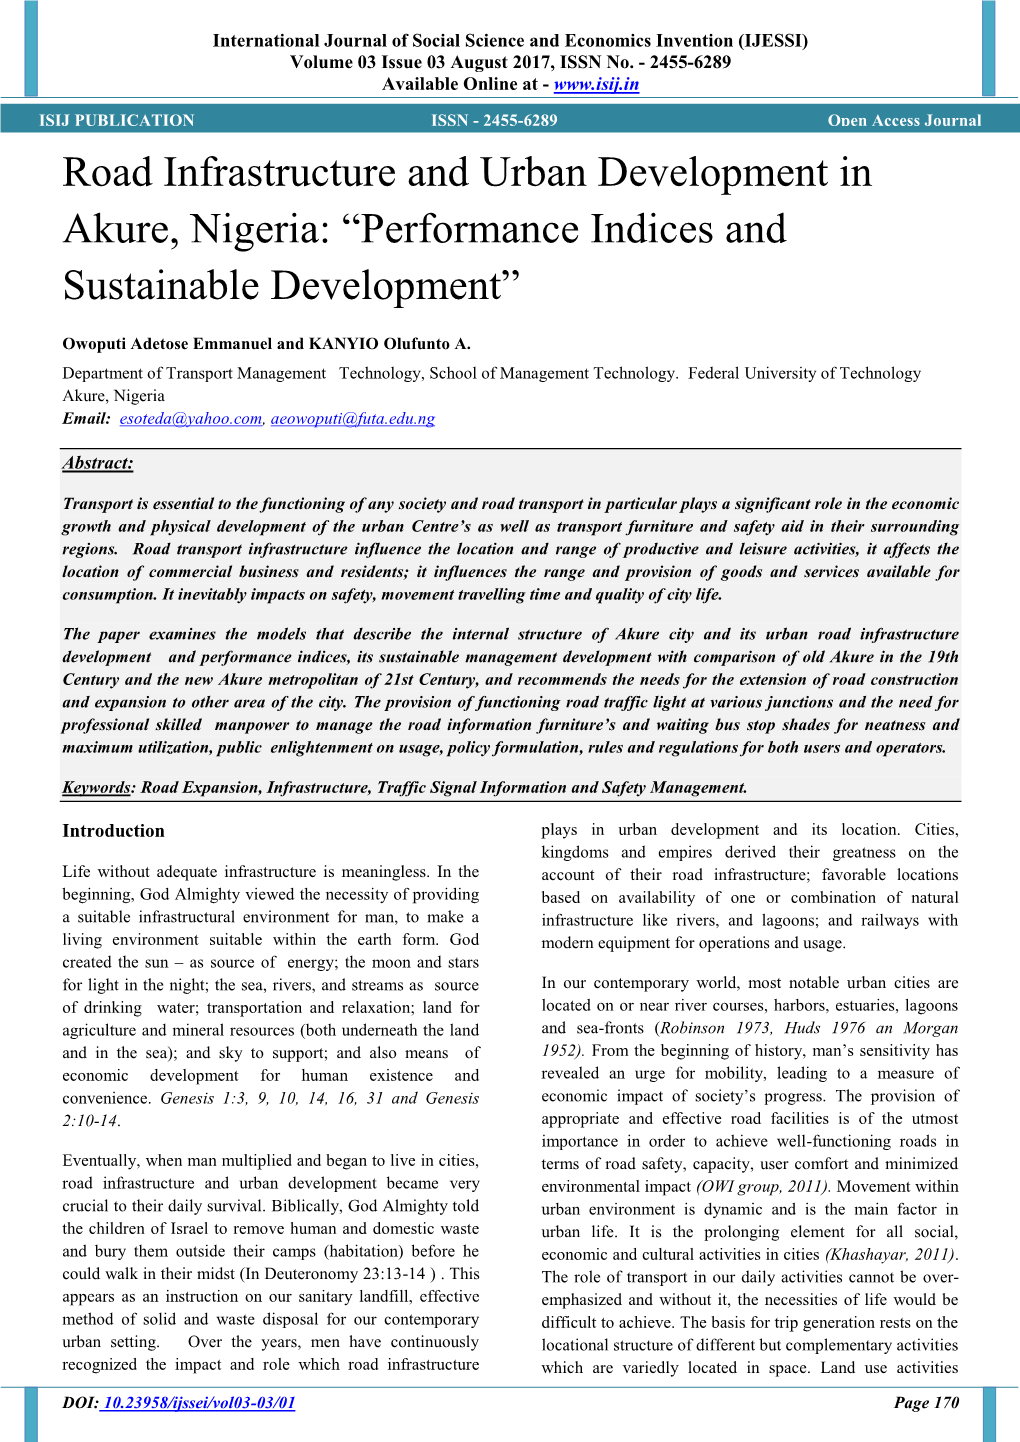 Road Infrastructure and Urban Development in Akure, Nigeria: “Performance Indices and Sustainable Development”